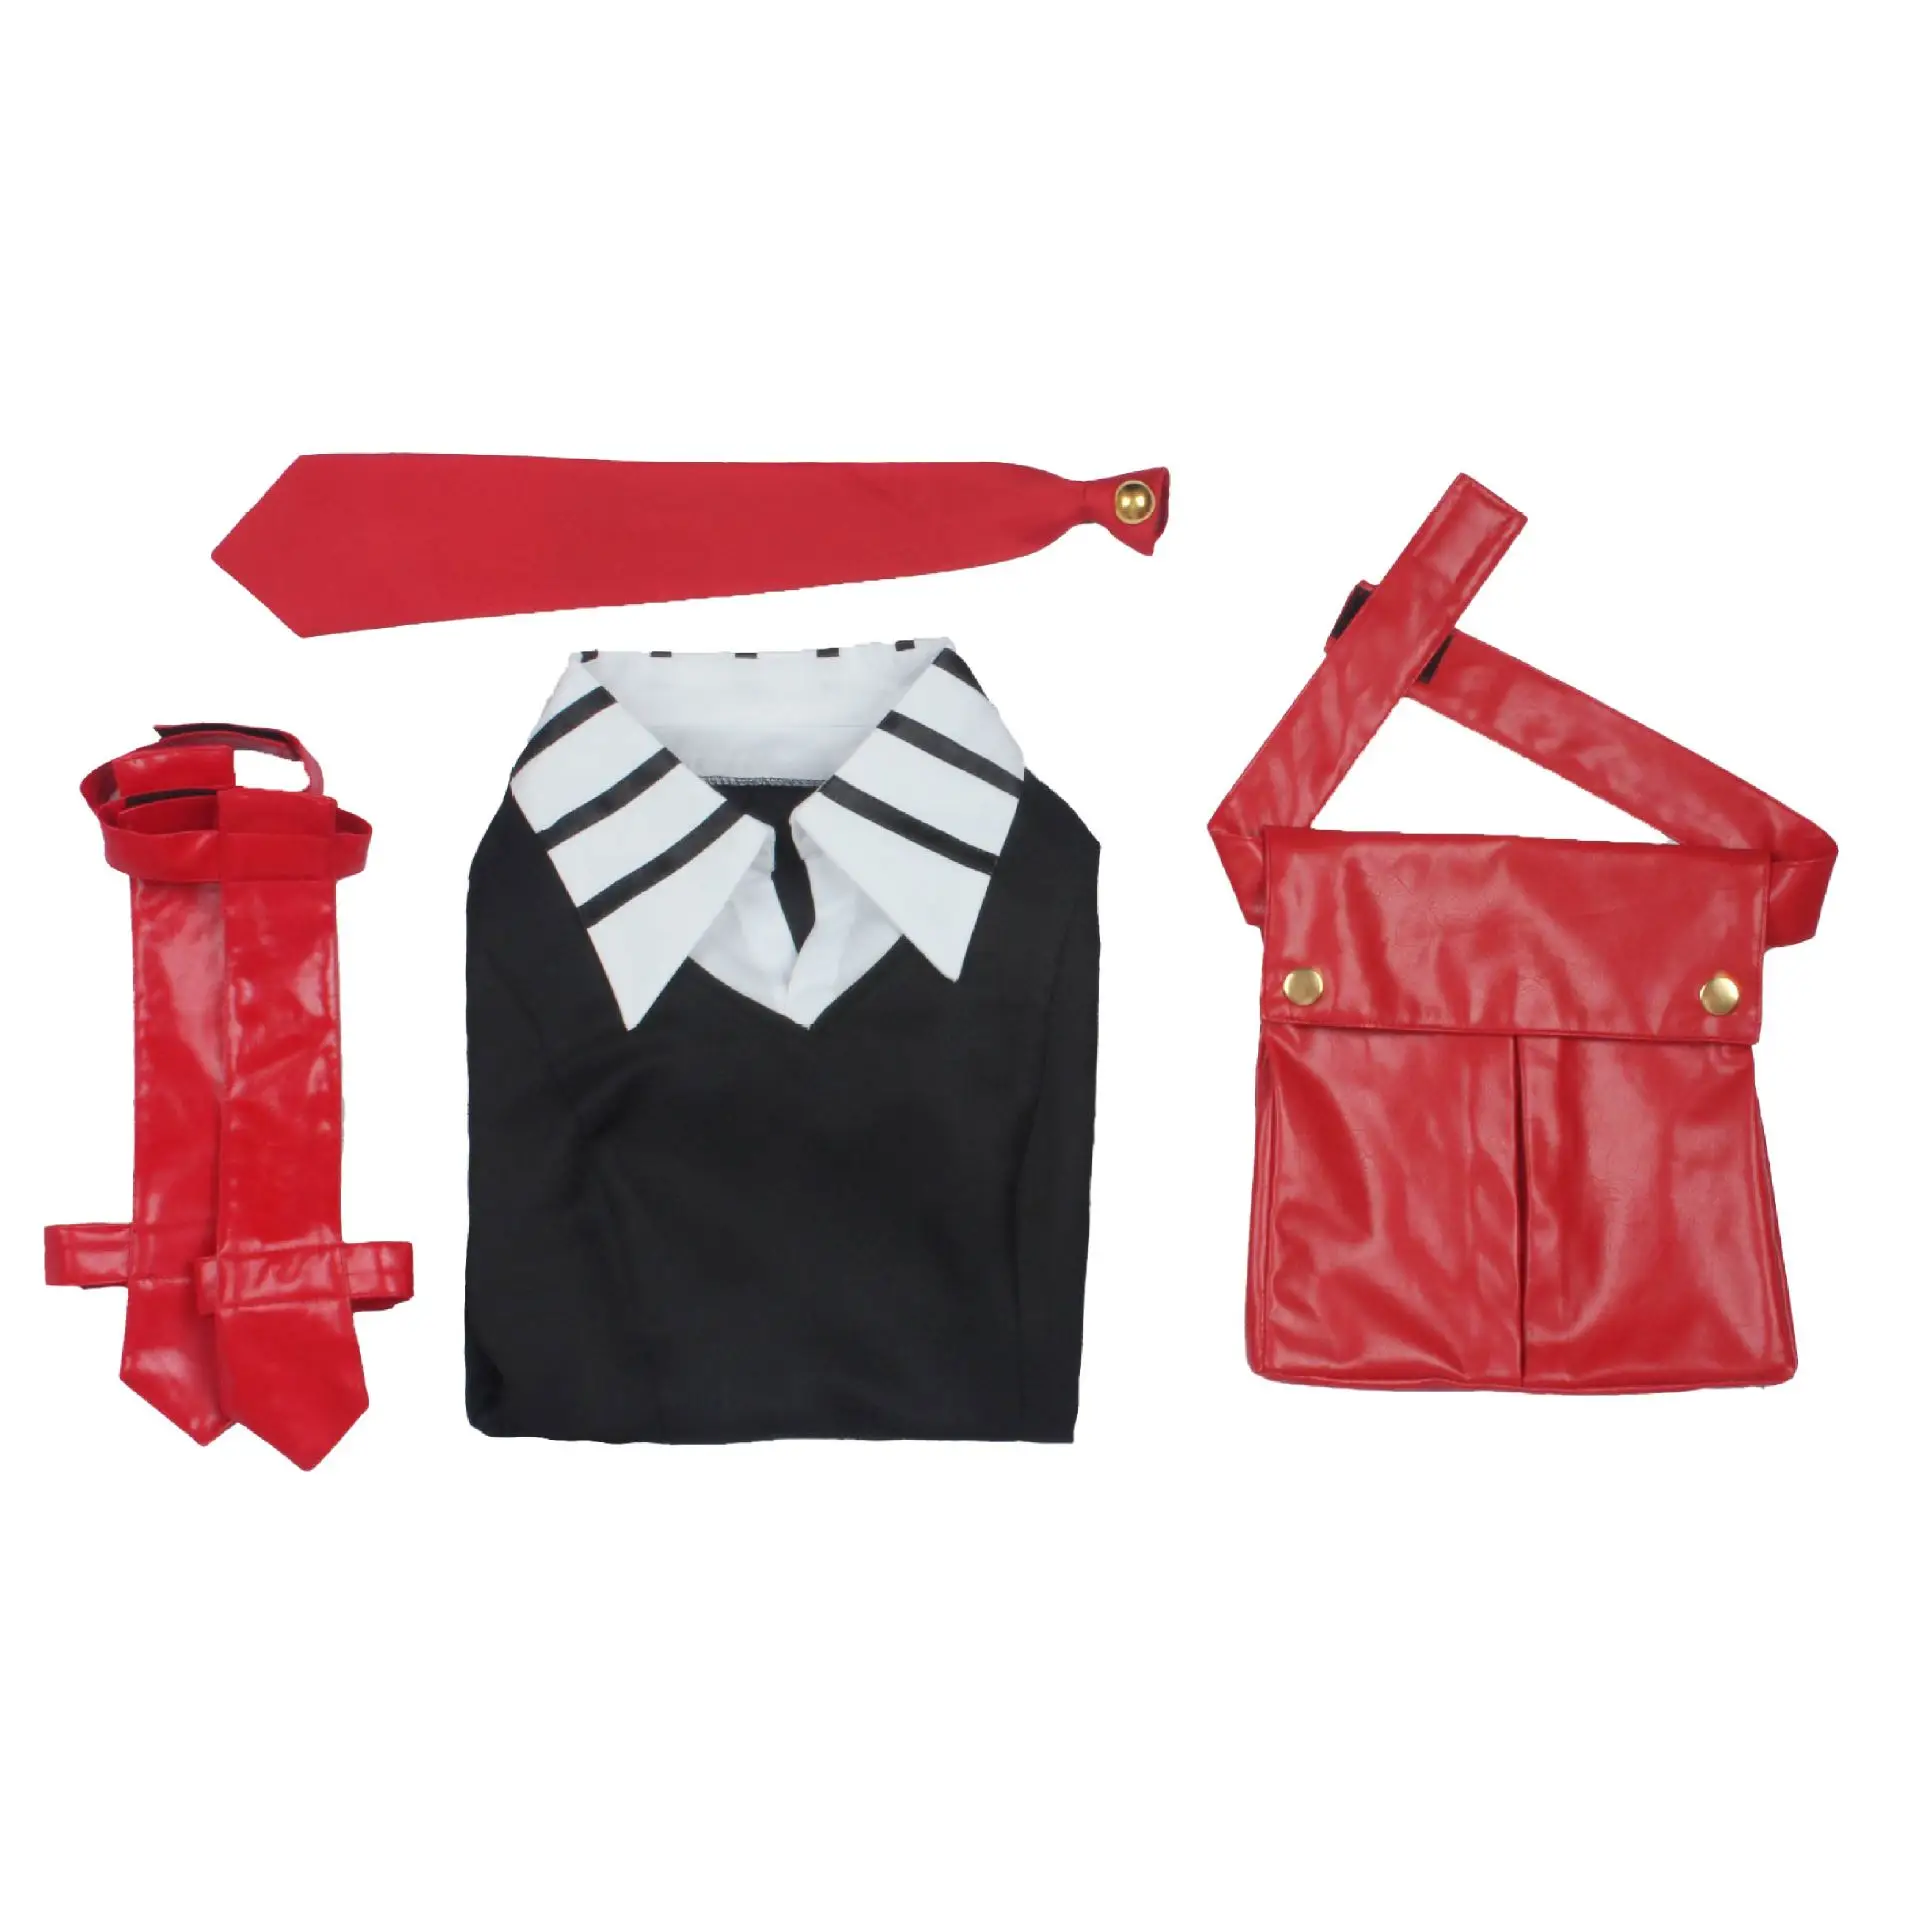 Japan Anime Akame ga KILL Dress Cosplay Costume Akame Women Halloween Party Costume +Belt + Tie Accessories Sets C81X11 images - 6